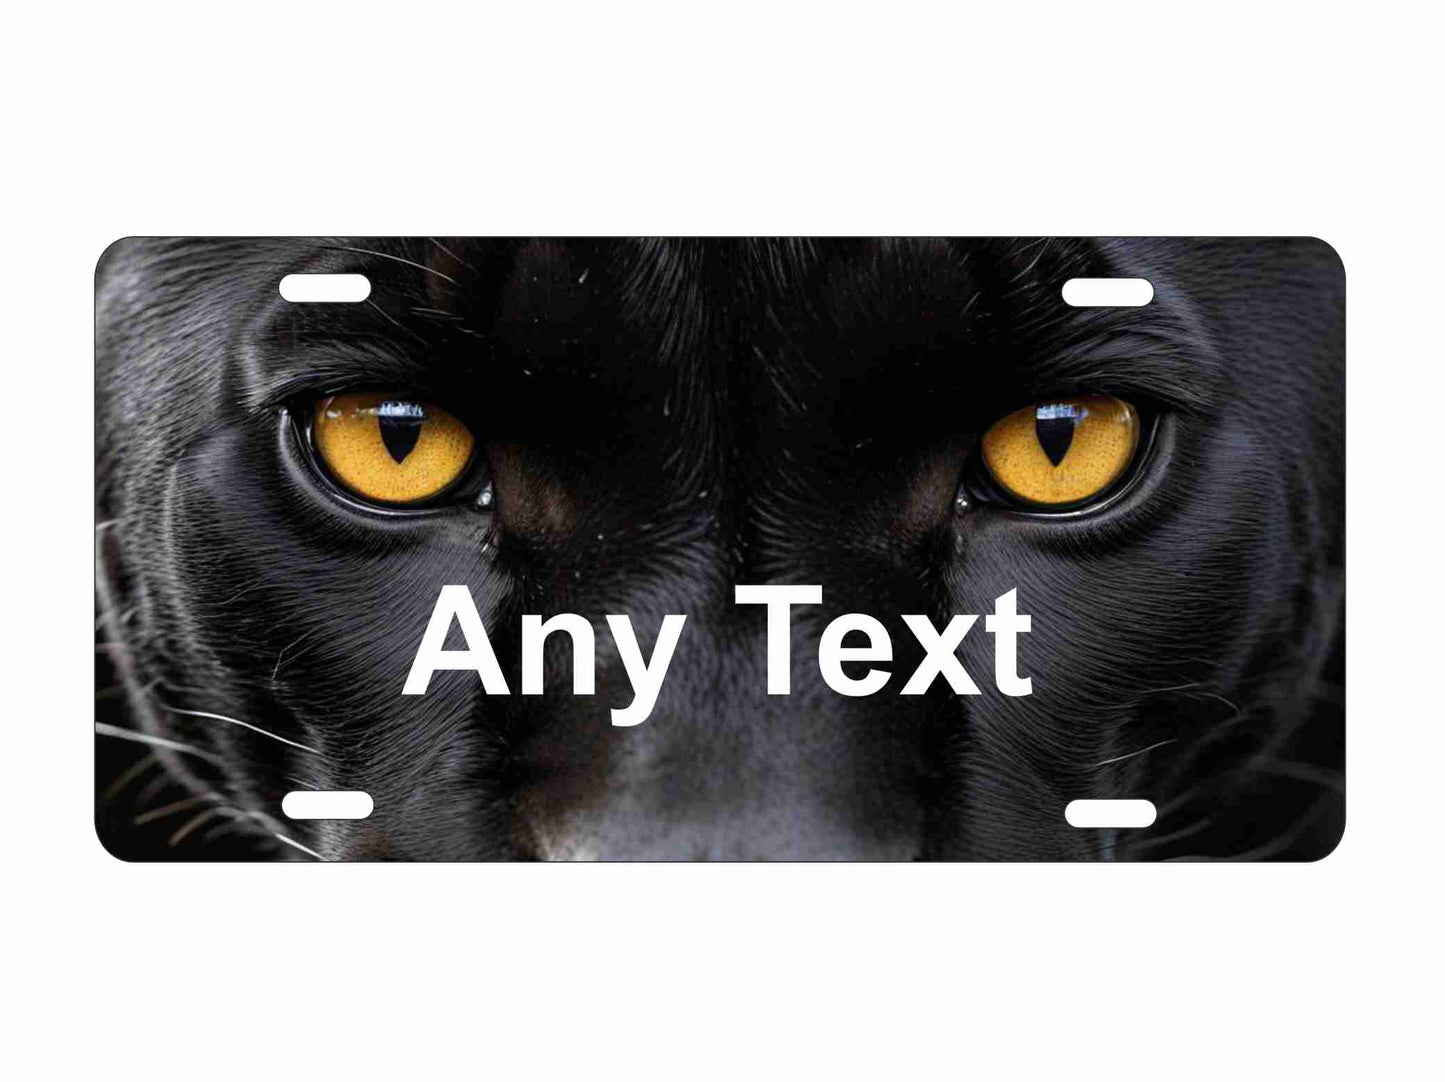 Panther face yellow eyes personalized novelty front license plate Decorative custom vanity car tag